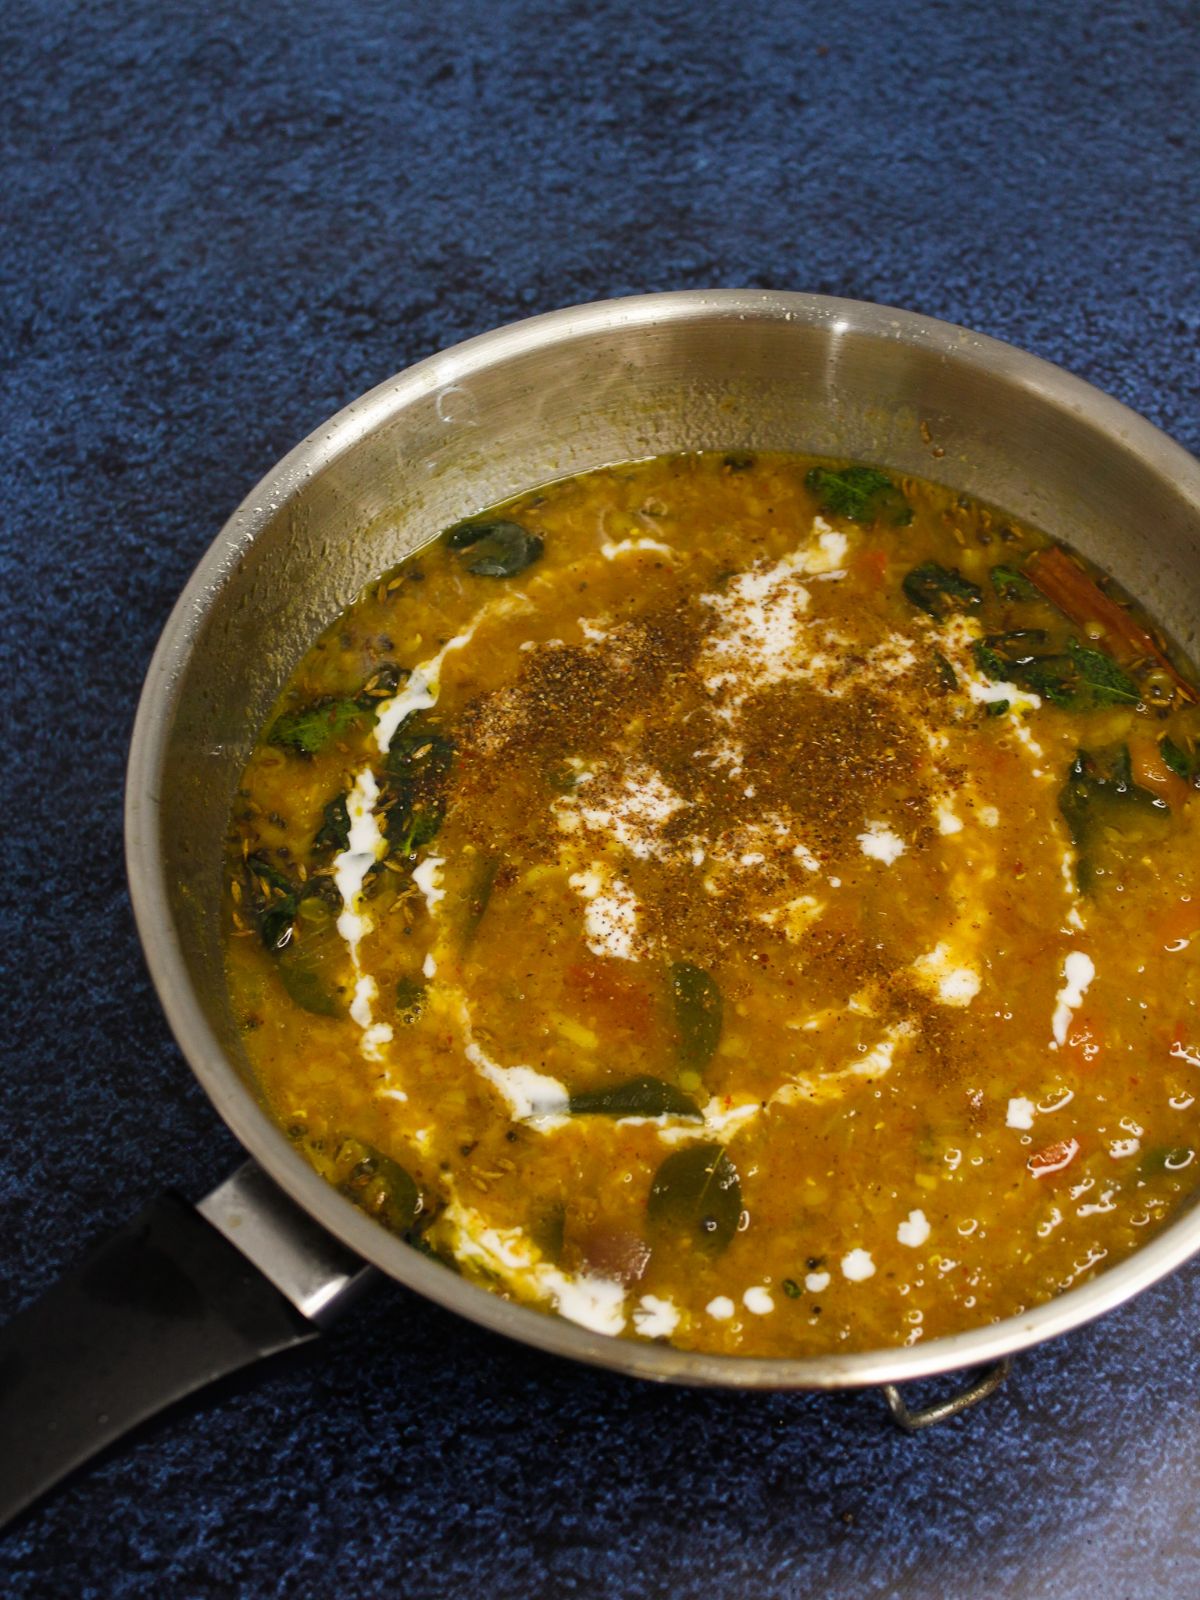 add garam masala to the dal mixture and cook well